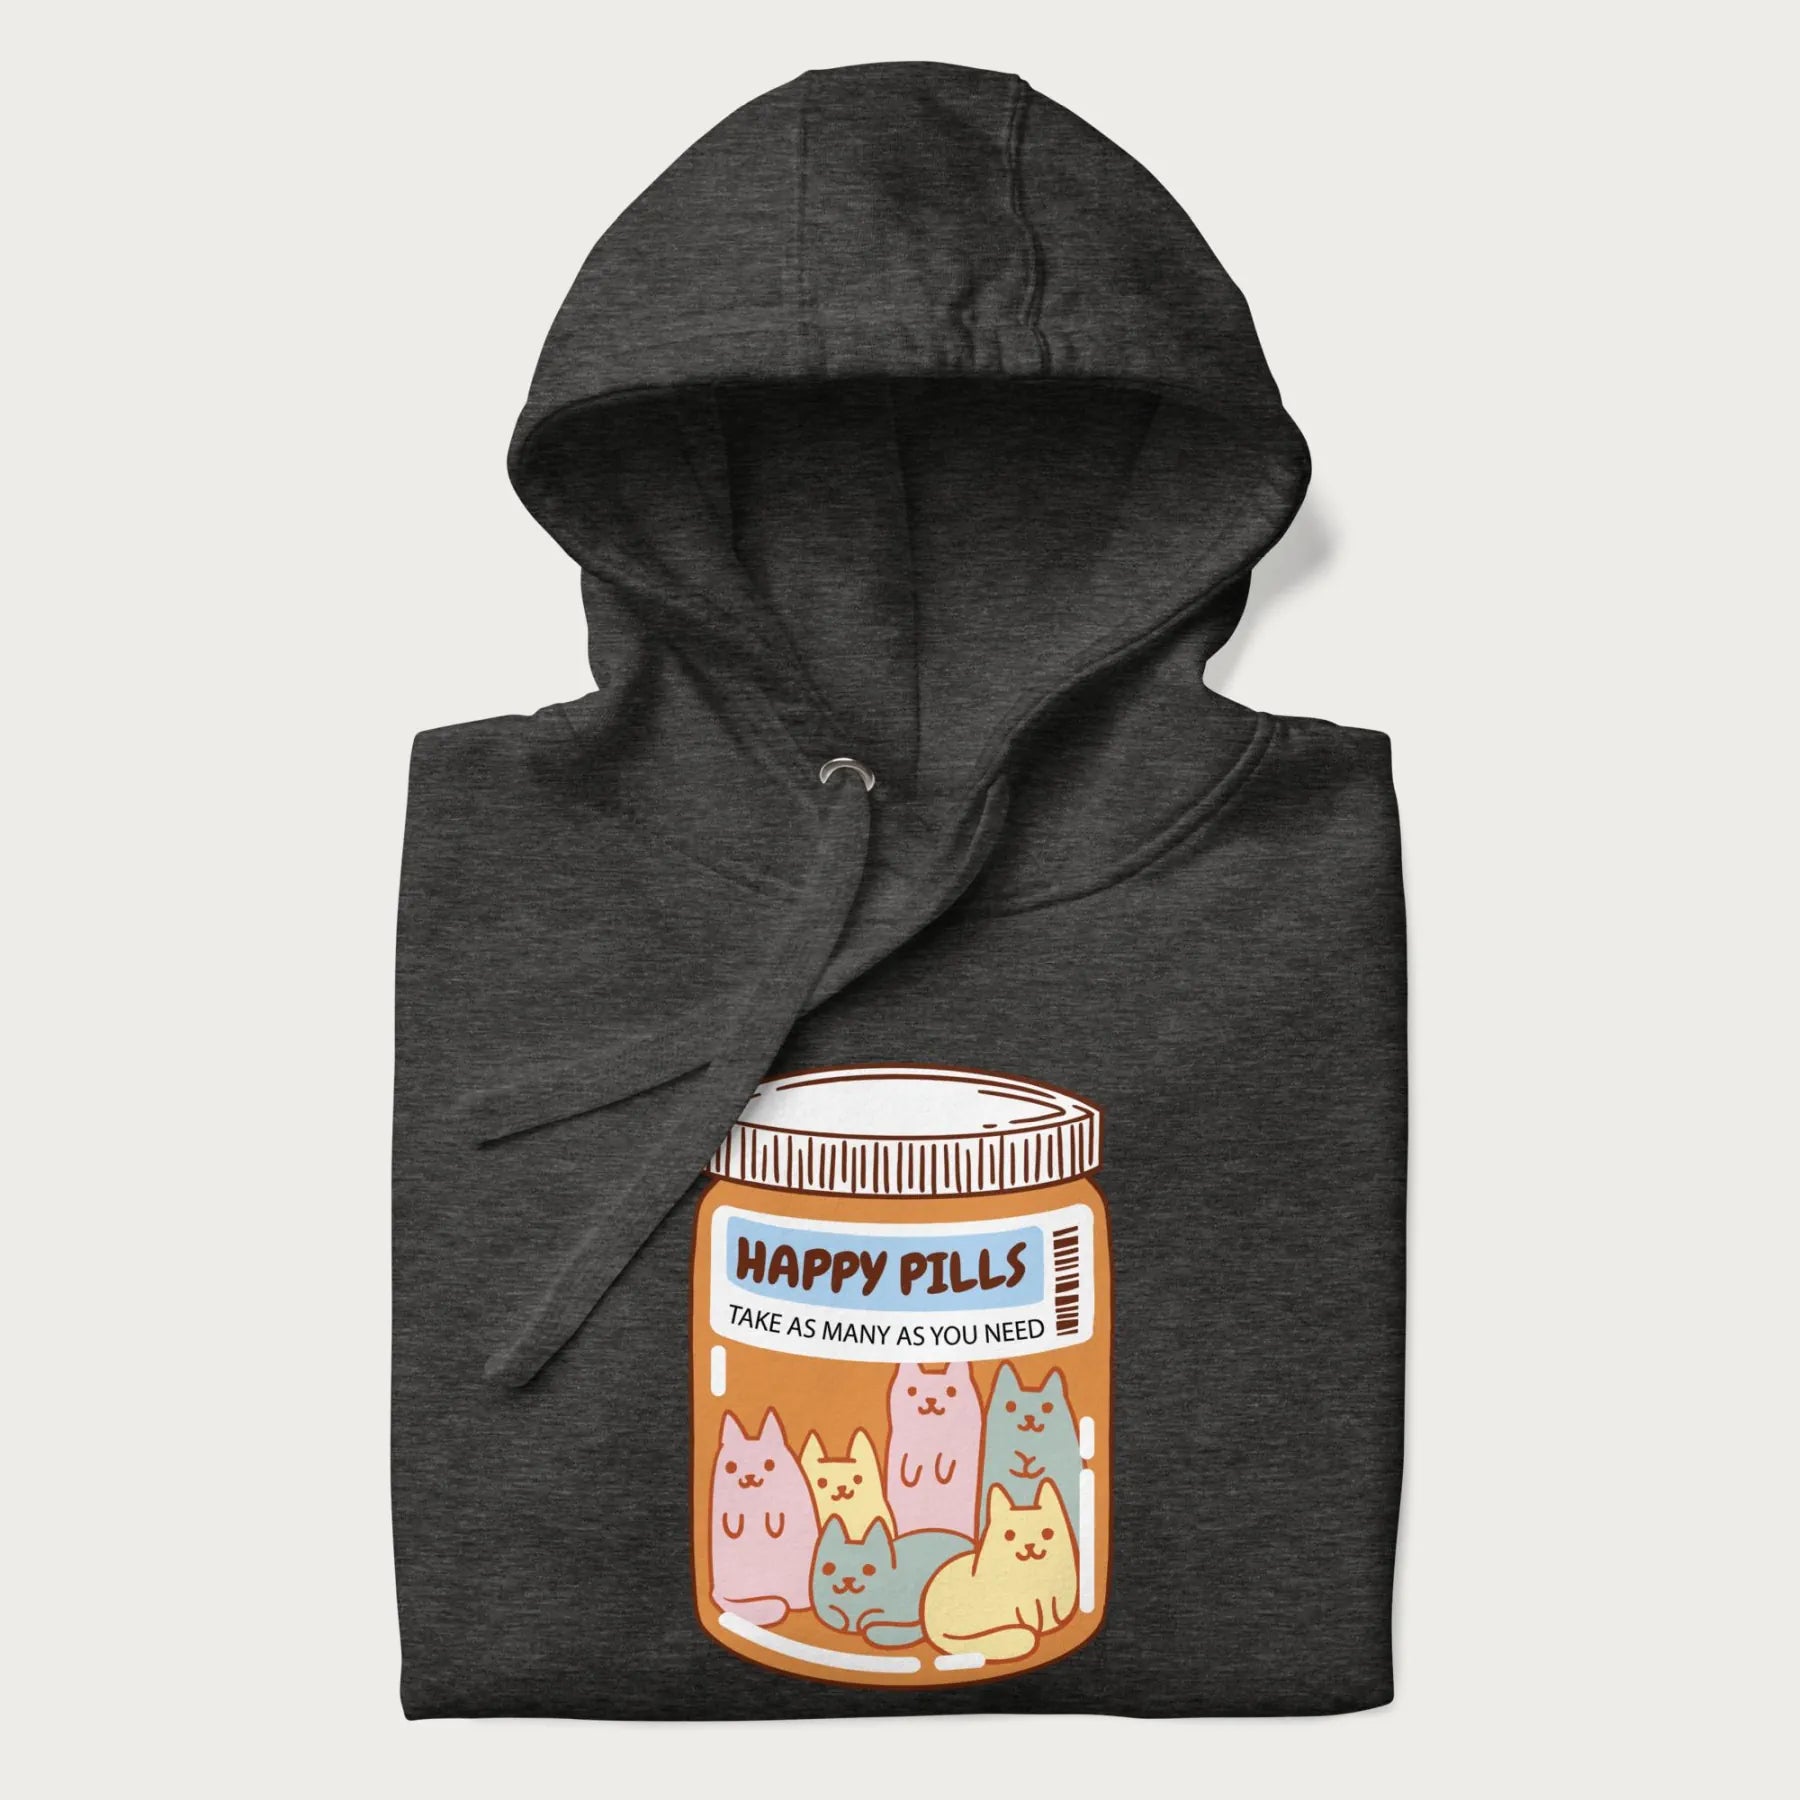 Cartoon cats in a pill bottle labeled 'Happy Pills' on a folded dark grey hoodie.